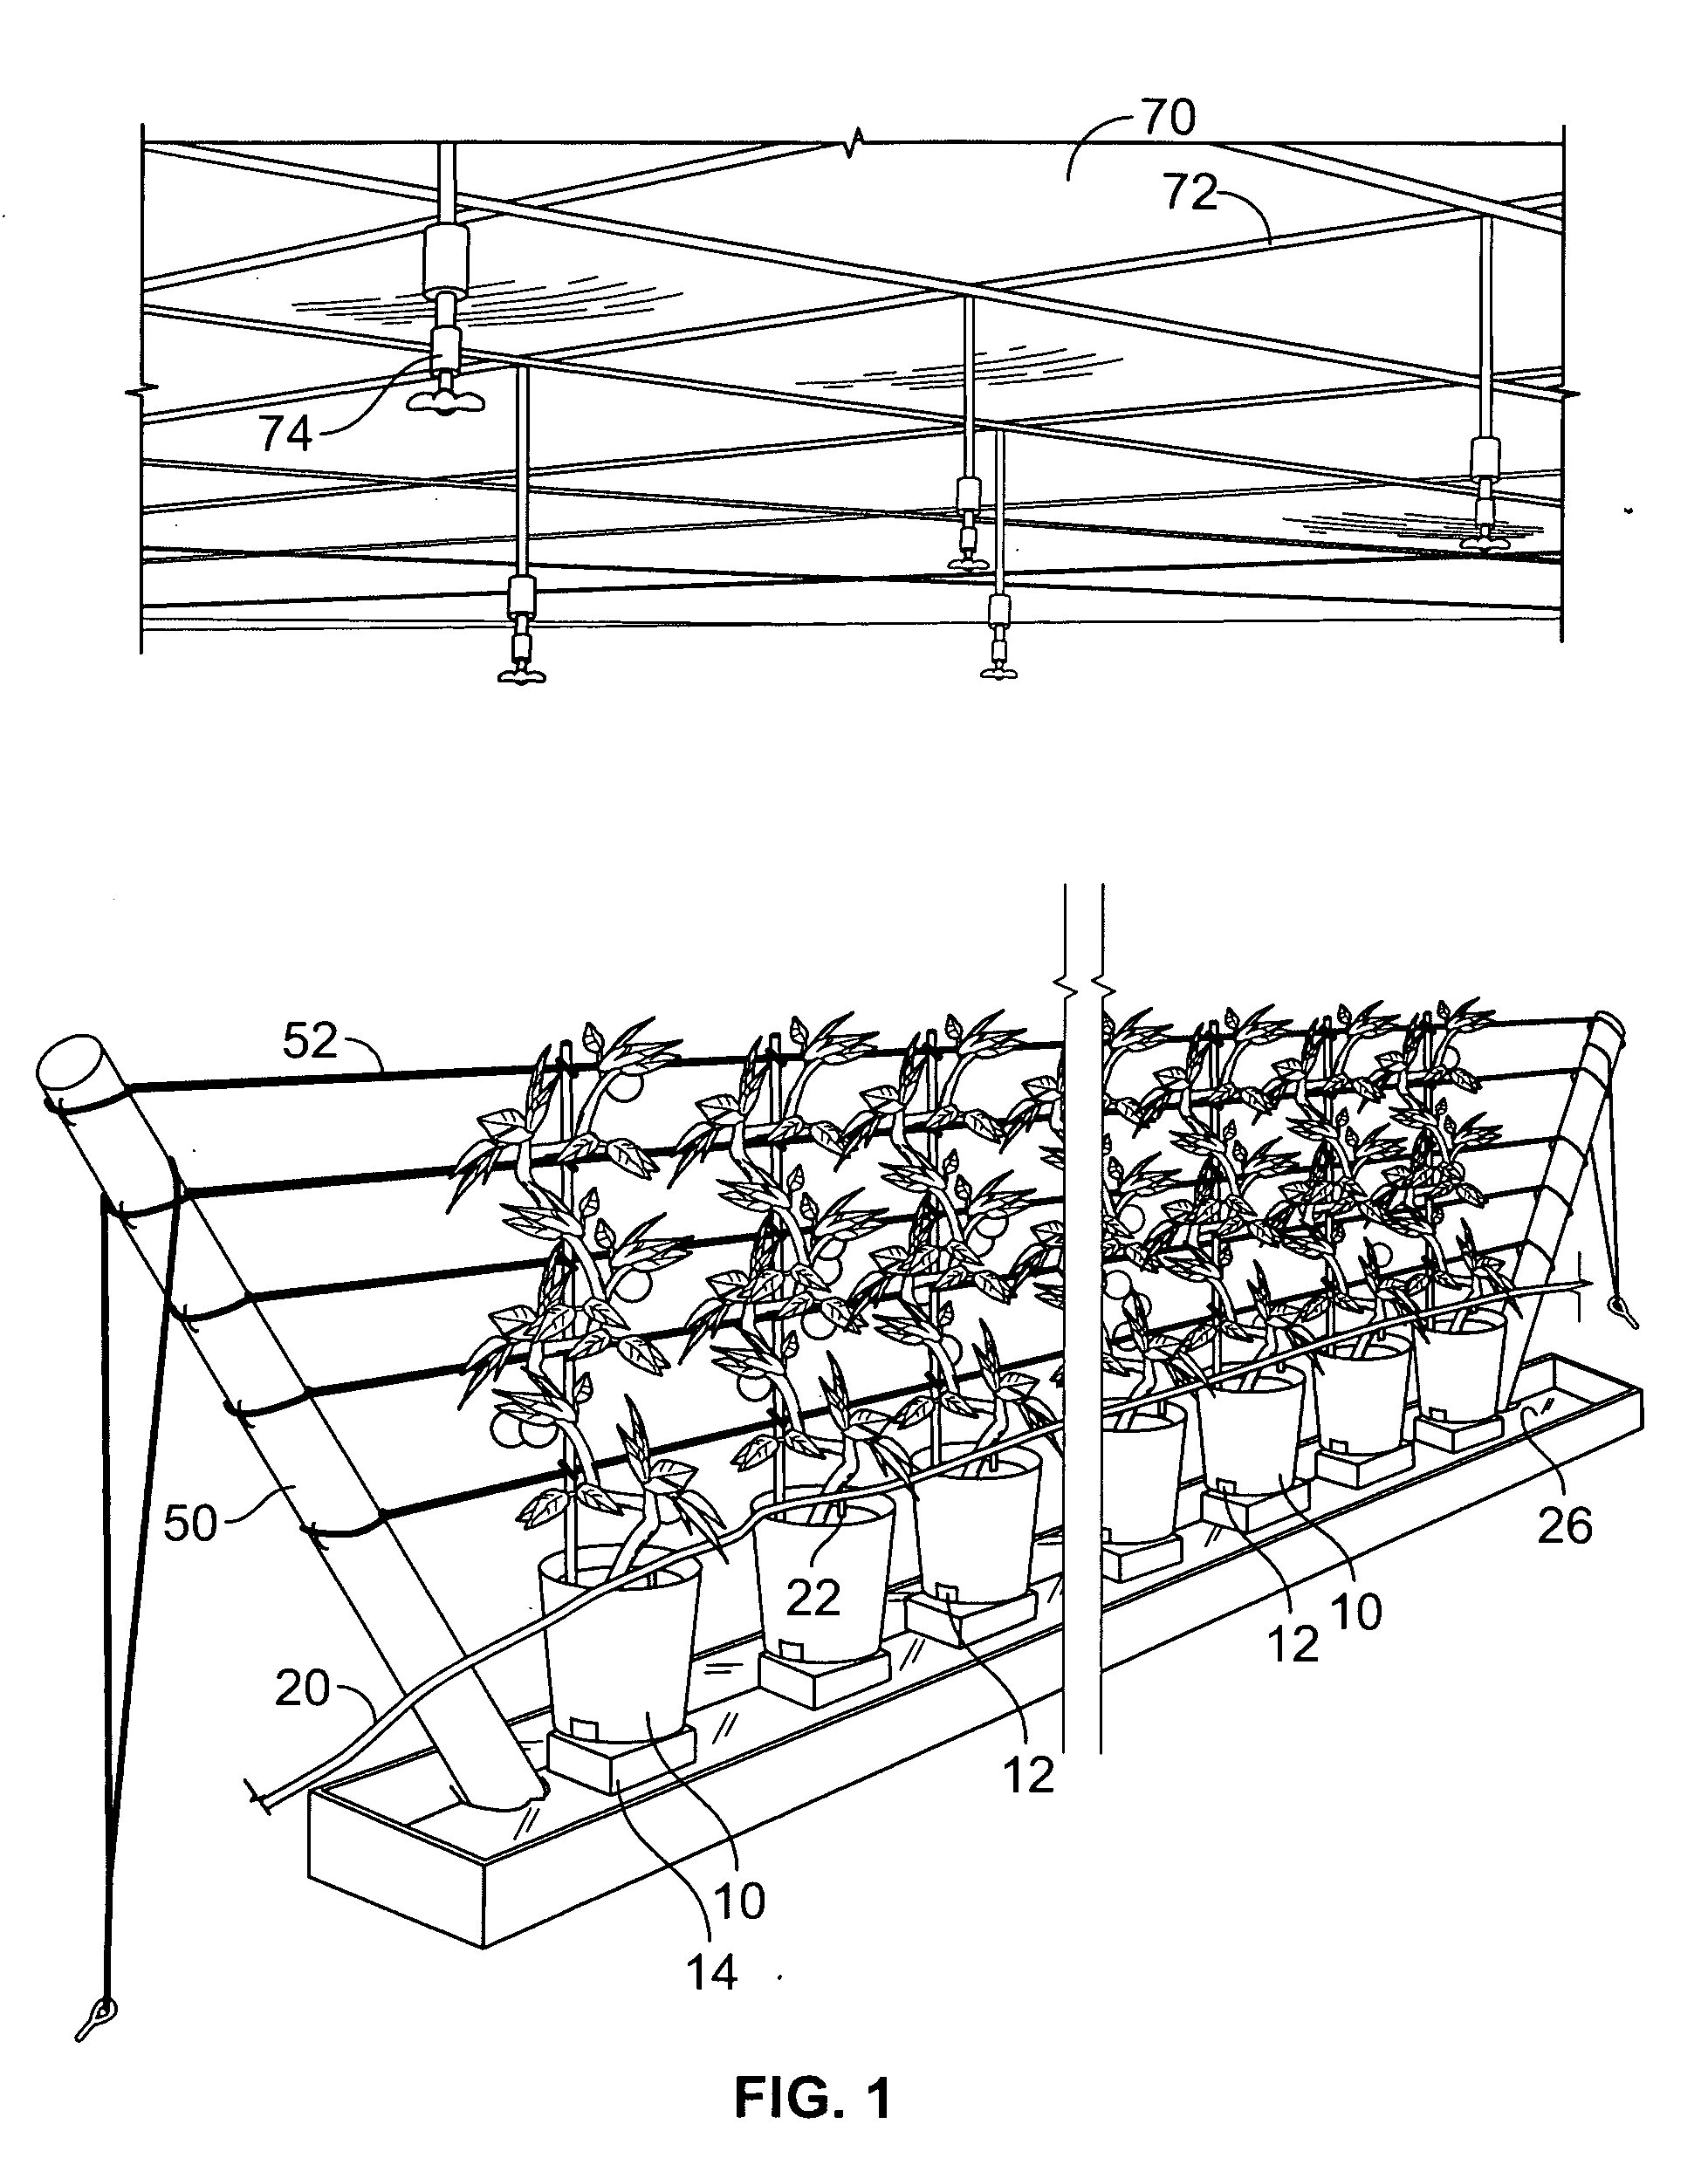 Method of hydroponic cultivation and components for use therewith